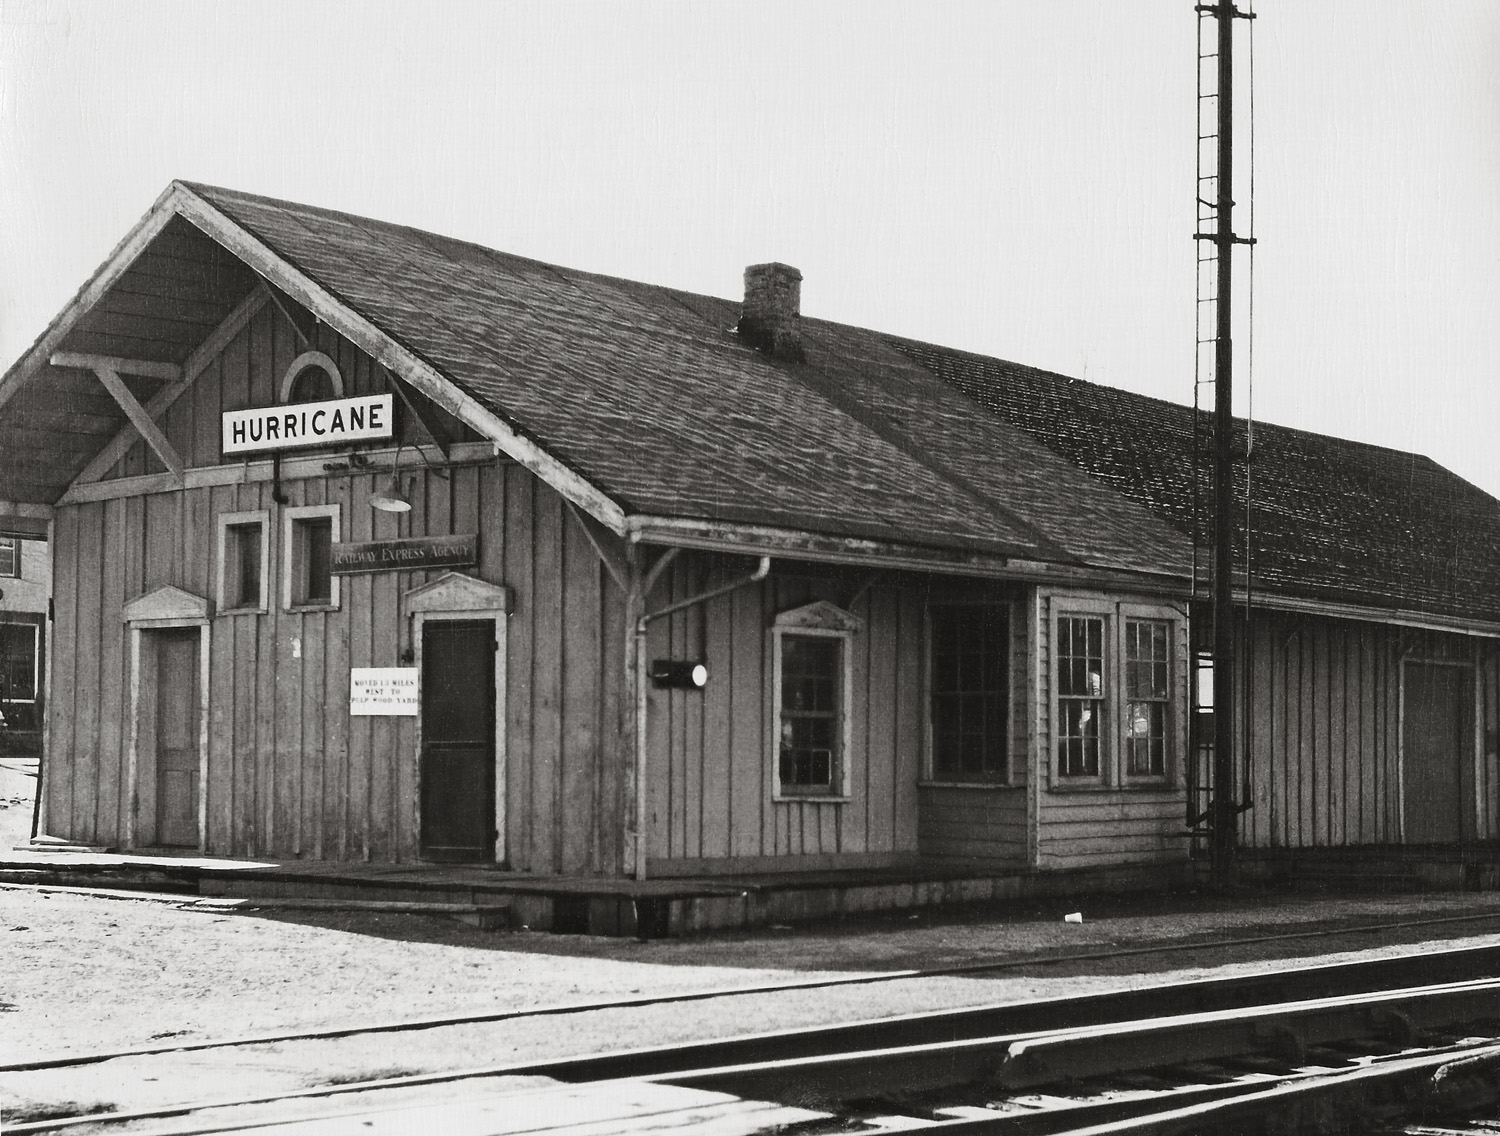 Taken sometime in the 1940's, this is the old C & O Railroad depot in Hurricane, W.Va. Until the 1960's an occasional passenger train stopped here as well as a few freights. If I remember correctly, it was torn down about 1970 and the wood used to build a barn for the Chief of Police. The area then became a parking lot and a rather cheesy gazebo was built later next to the tracks. About 15 or so years ago, the large water tank just down the track was demolished. The switch tower across the tracks was also razed quite a few years ago. I was only about 11 years old when the depot was torn down and even then I was mad as a hornet about it. What makes this so ironic is the fact that Hurricane owes its existence to the railroad, having been moved nearly 2 miles from the James River and Kanawha Turnpike so as to be near the new track in 1873. The only commemoration of our ties to the C & O now are a very small museum in a caboose behind the fire station and a couple of murals on the fire station walls. This image was given to my Aunt by the high school librarian who was an avid photographer. He was still teaching when I was in high school and he led the photography club.  I still have it in its frame. View full size.